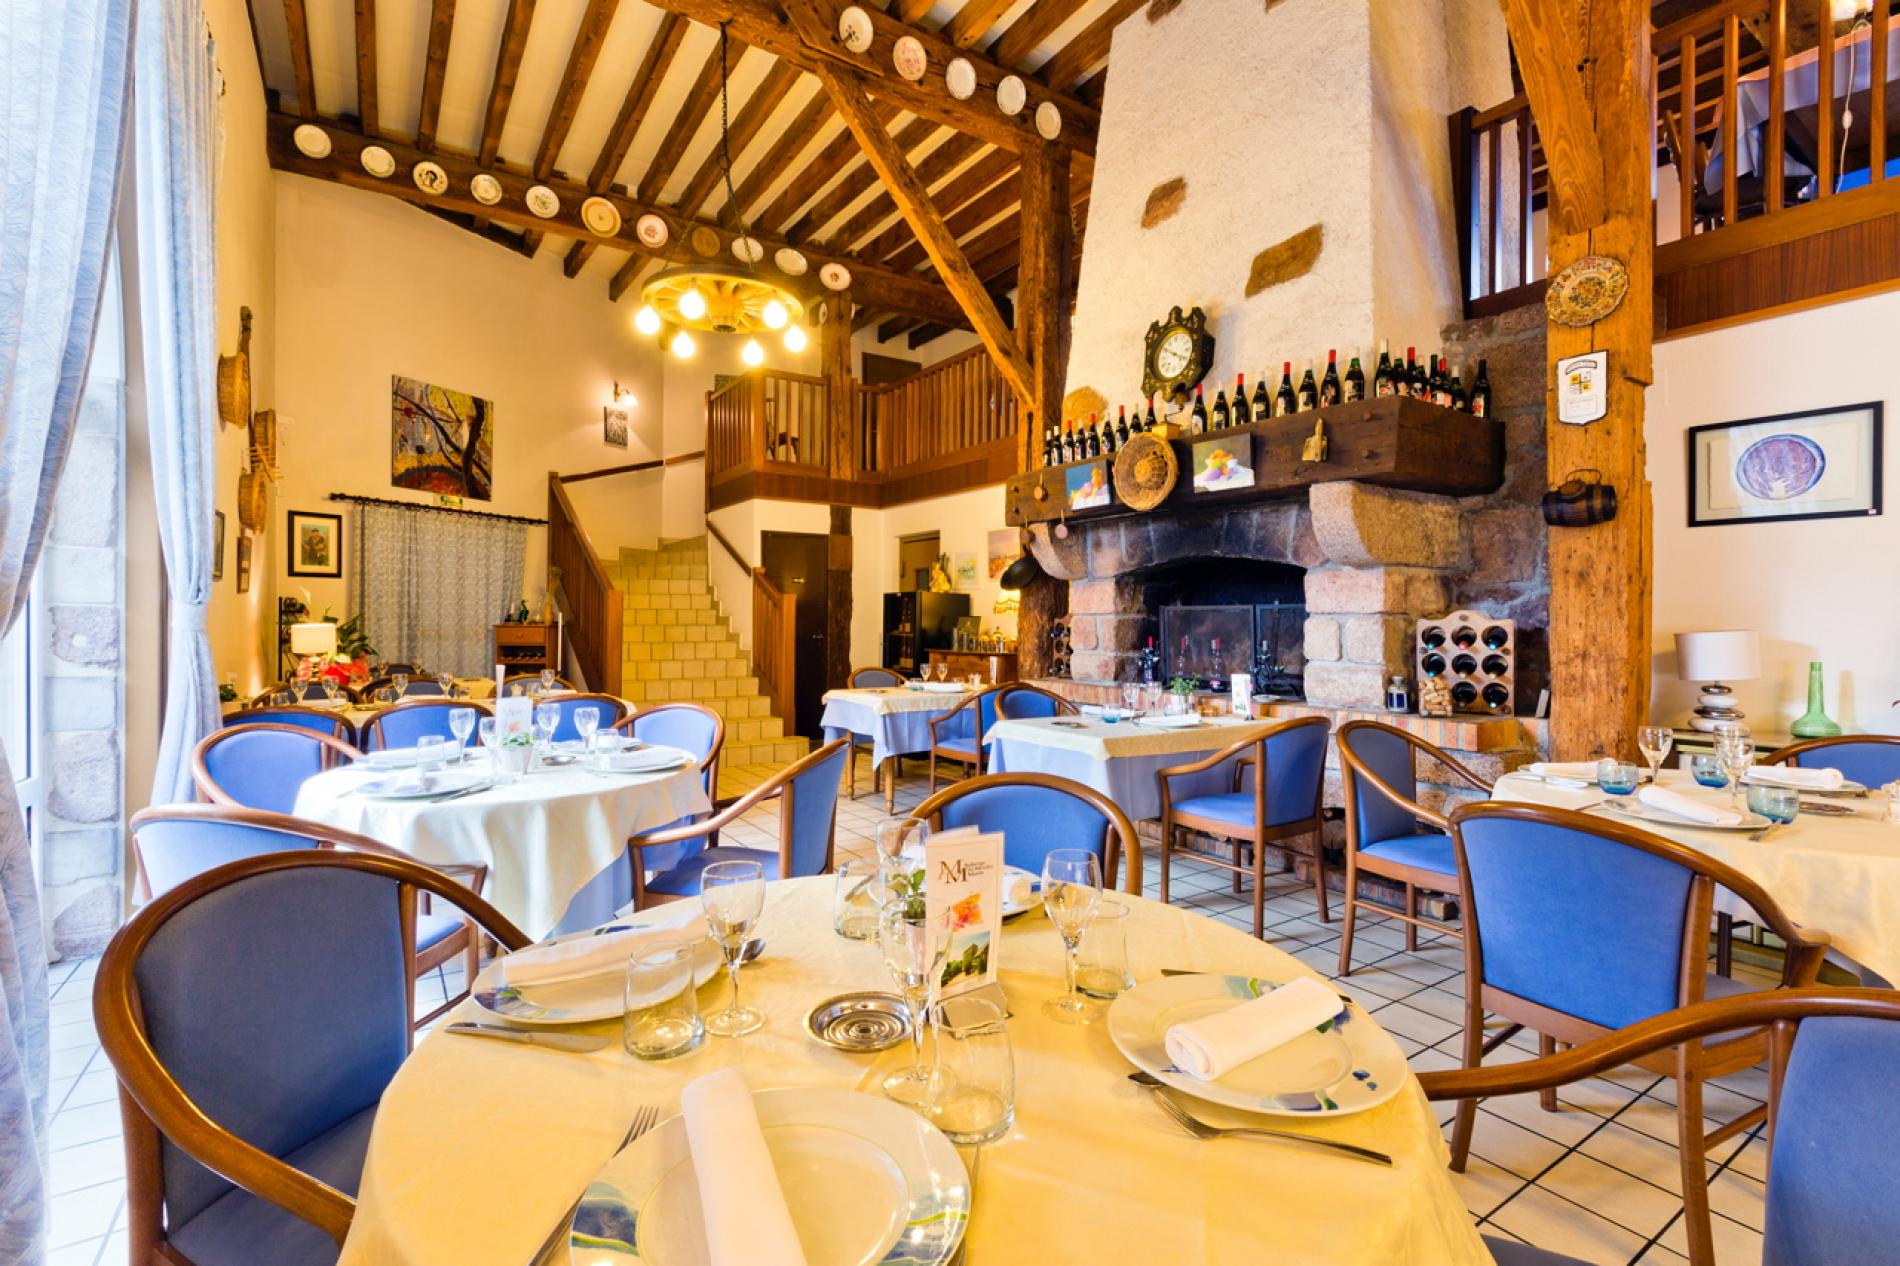 The Auberge Du Moulin Marin is housed in a former 19th century mill